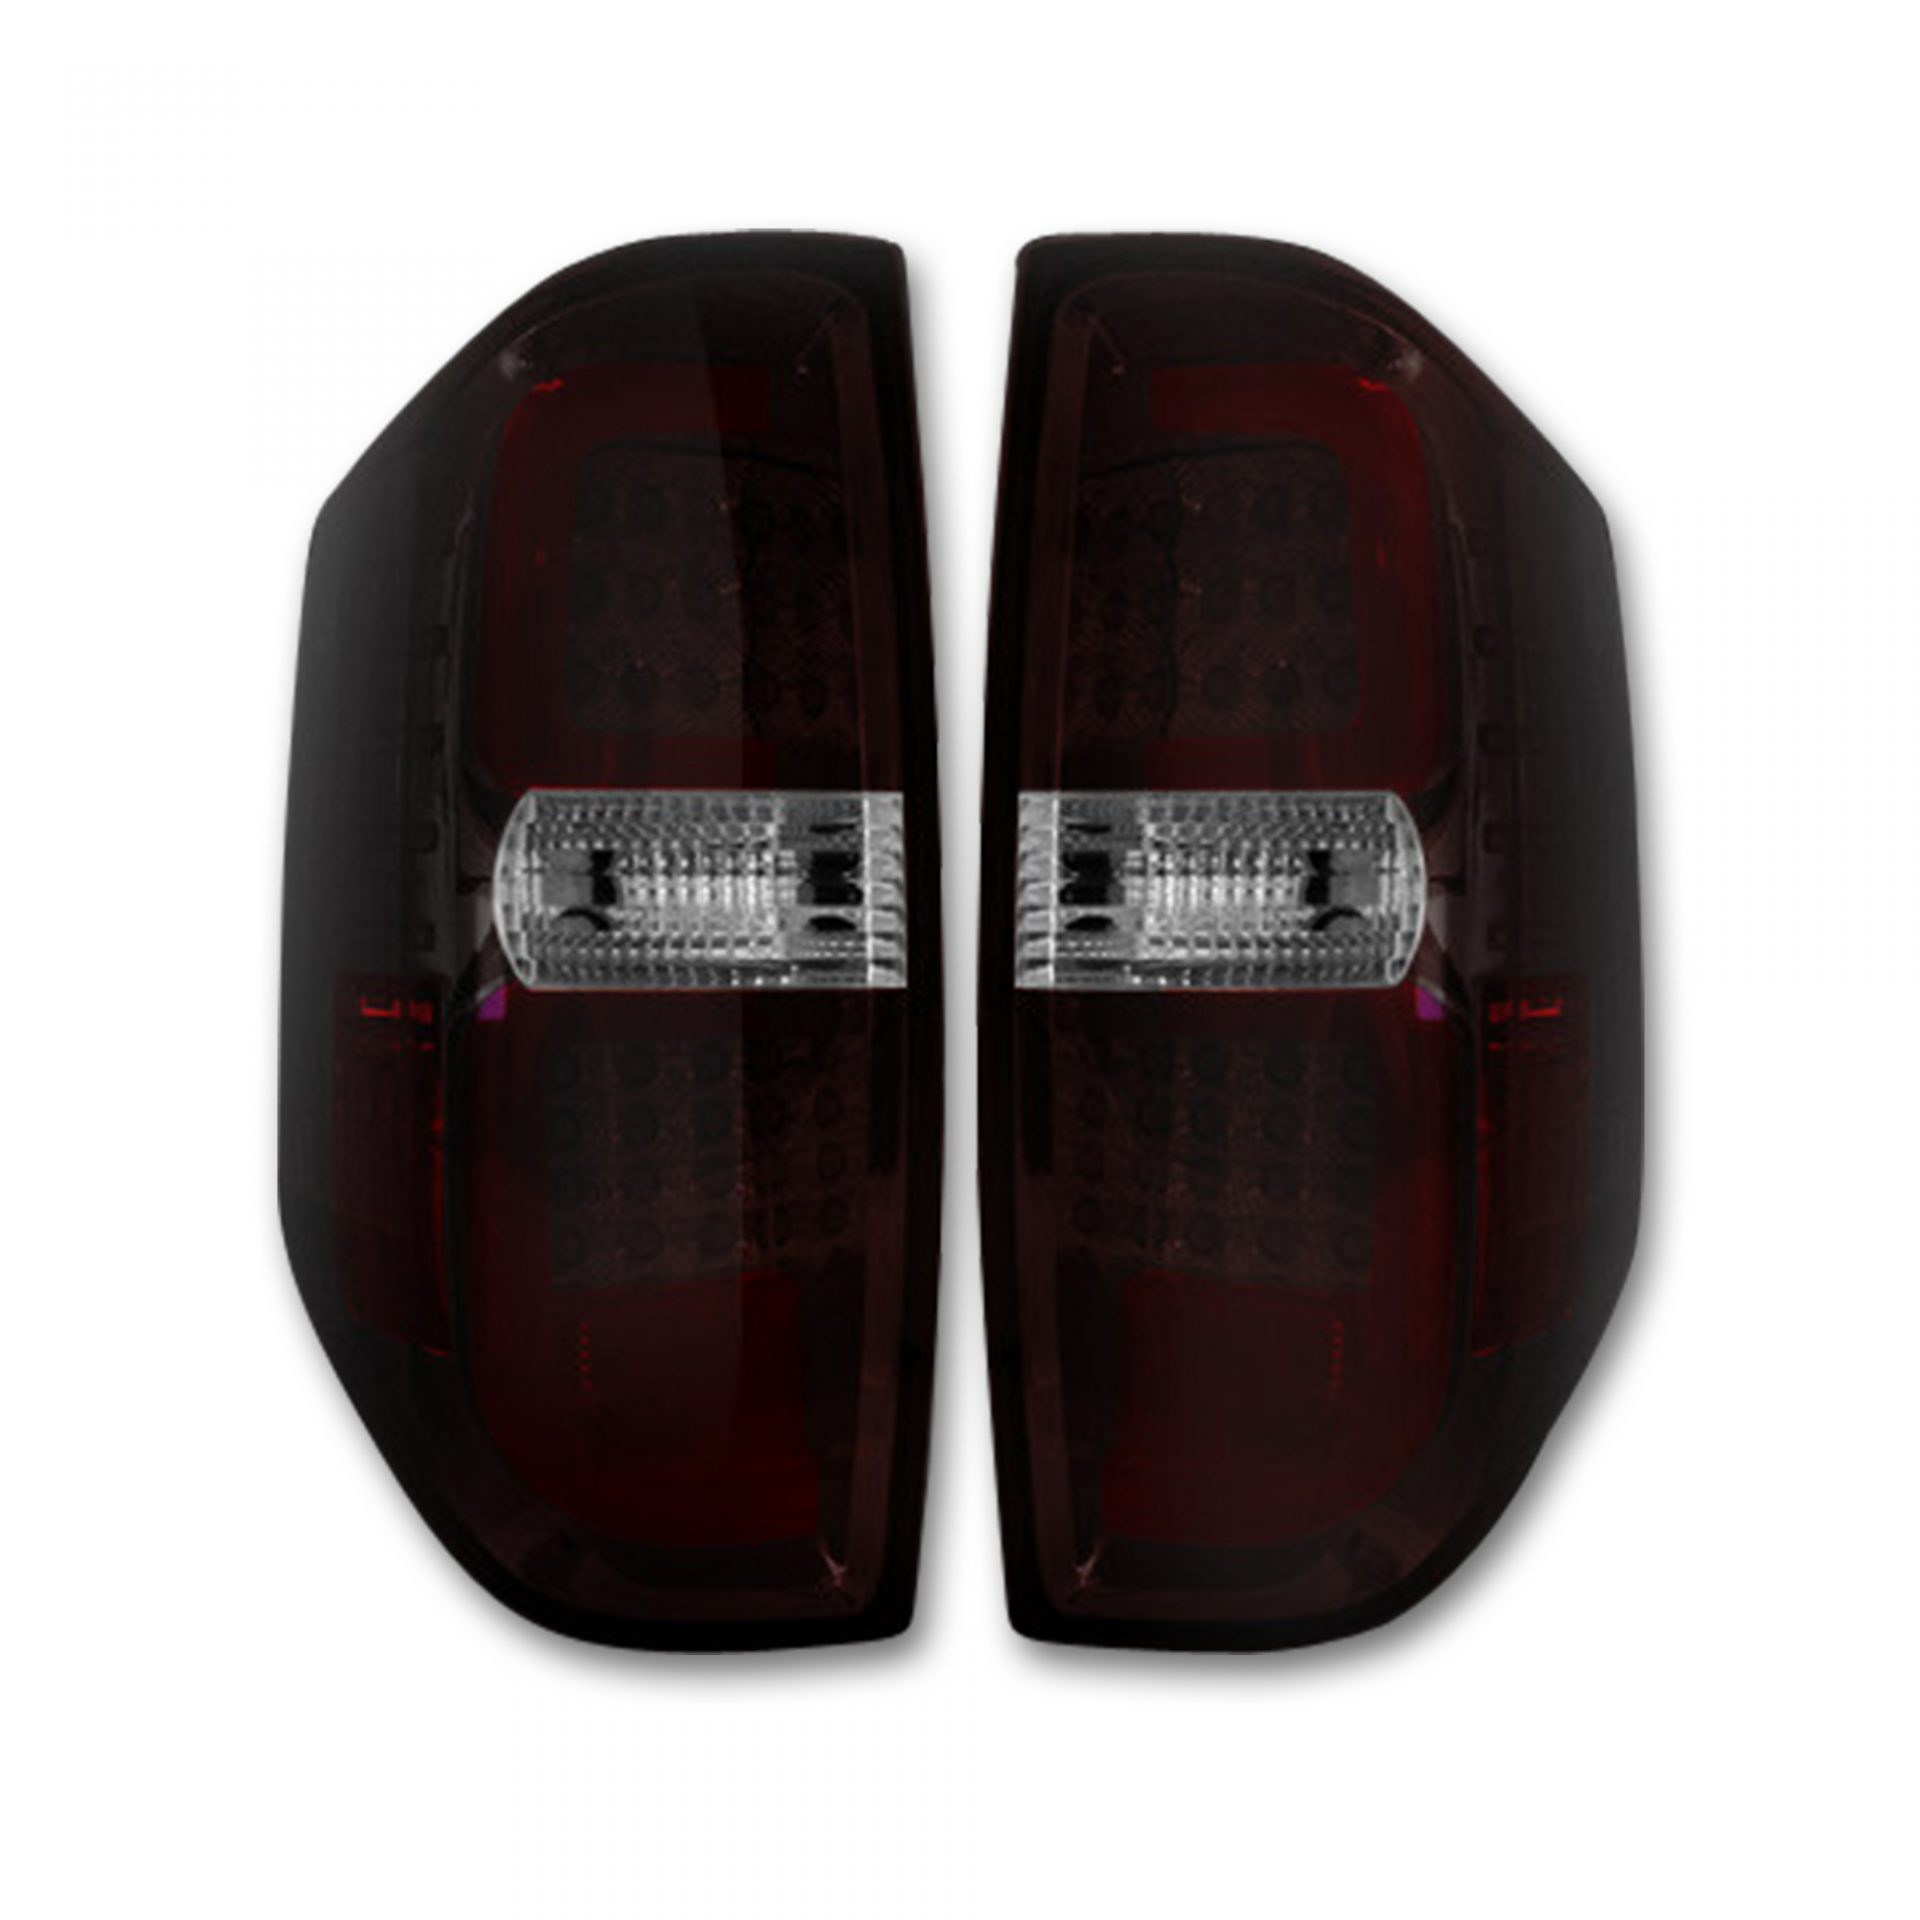 Toyota Tundra 14-19 LED Tail Lights in Dark Red Smoked